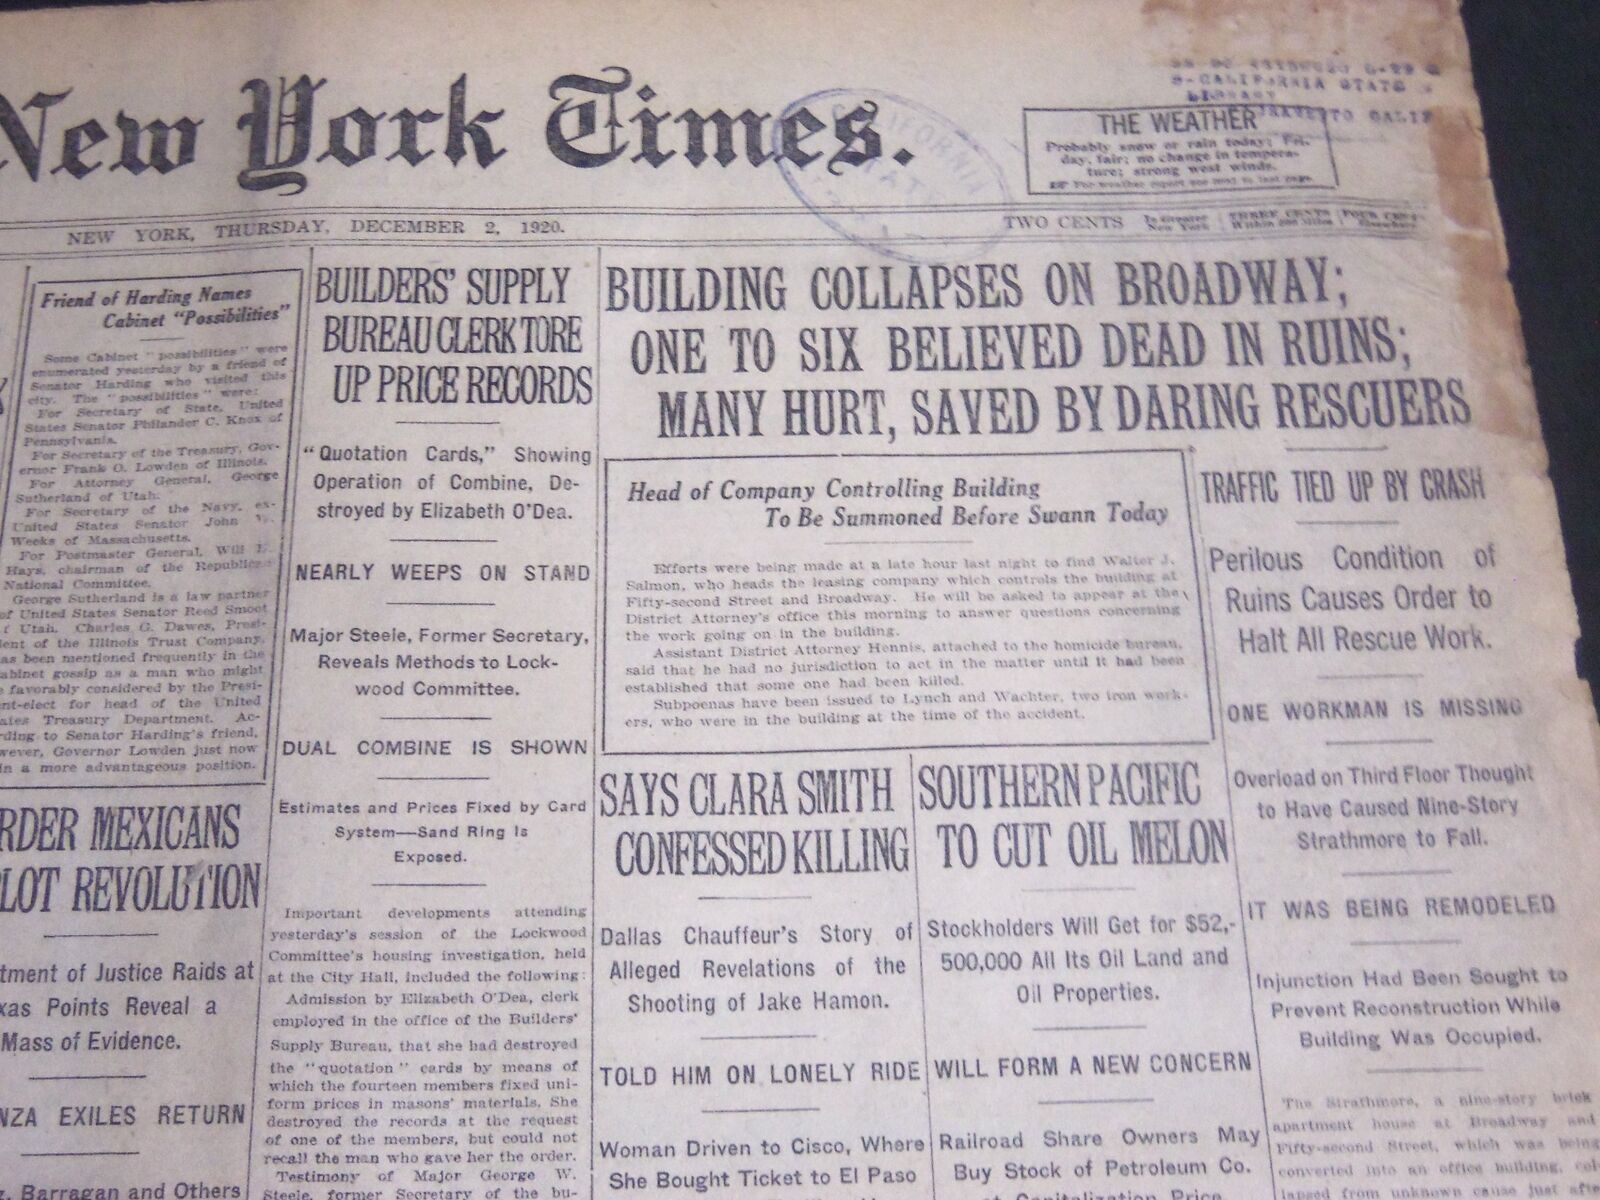 1920 DECEMBER 2 NEW YORK TIMES - BUILDING COLLAPSES ON BROADWAY - NT 6759